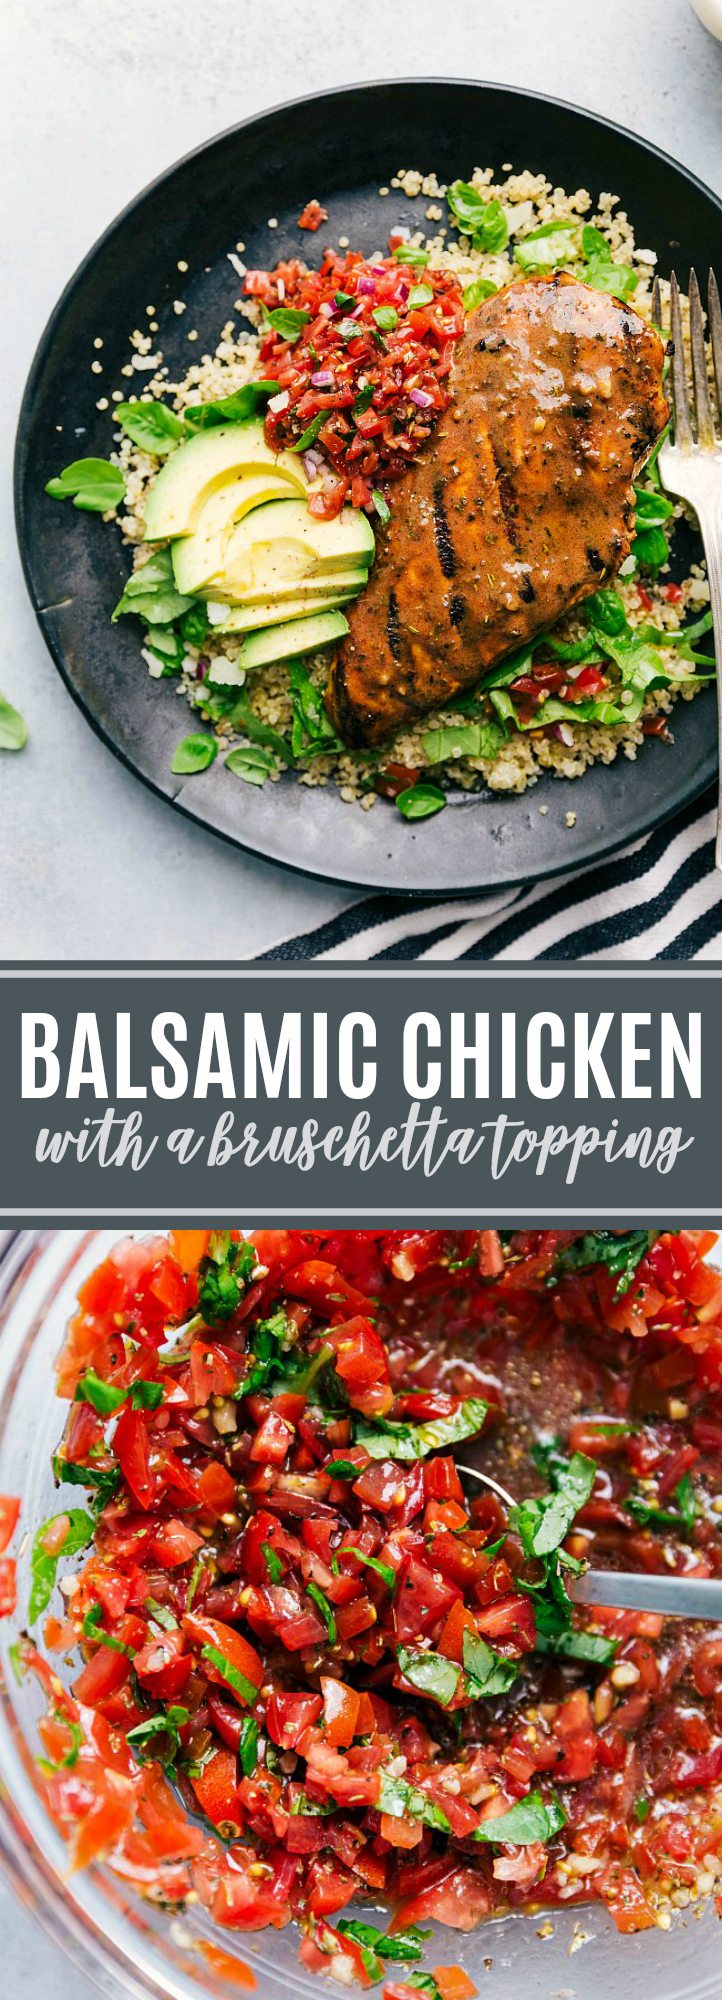 Balsamic marinated chicken with a delicious bruschetta topping and avocado! Easy, fresh, delicious, and healthy dinner via chelseasmessyapron.com #chicken #easy #quick #dinner #bruschetta #tomato #basil #quinoa #healthy #easy #quick #grill #kidfriendly